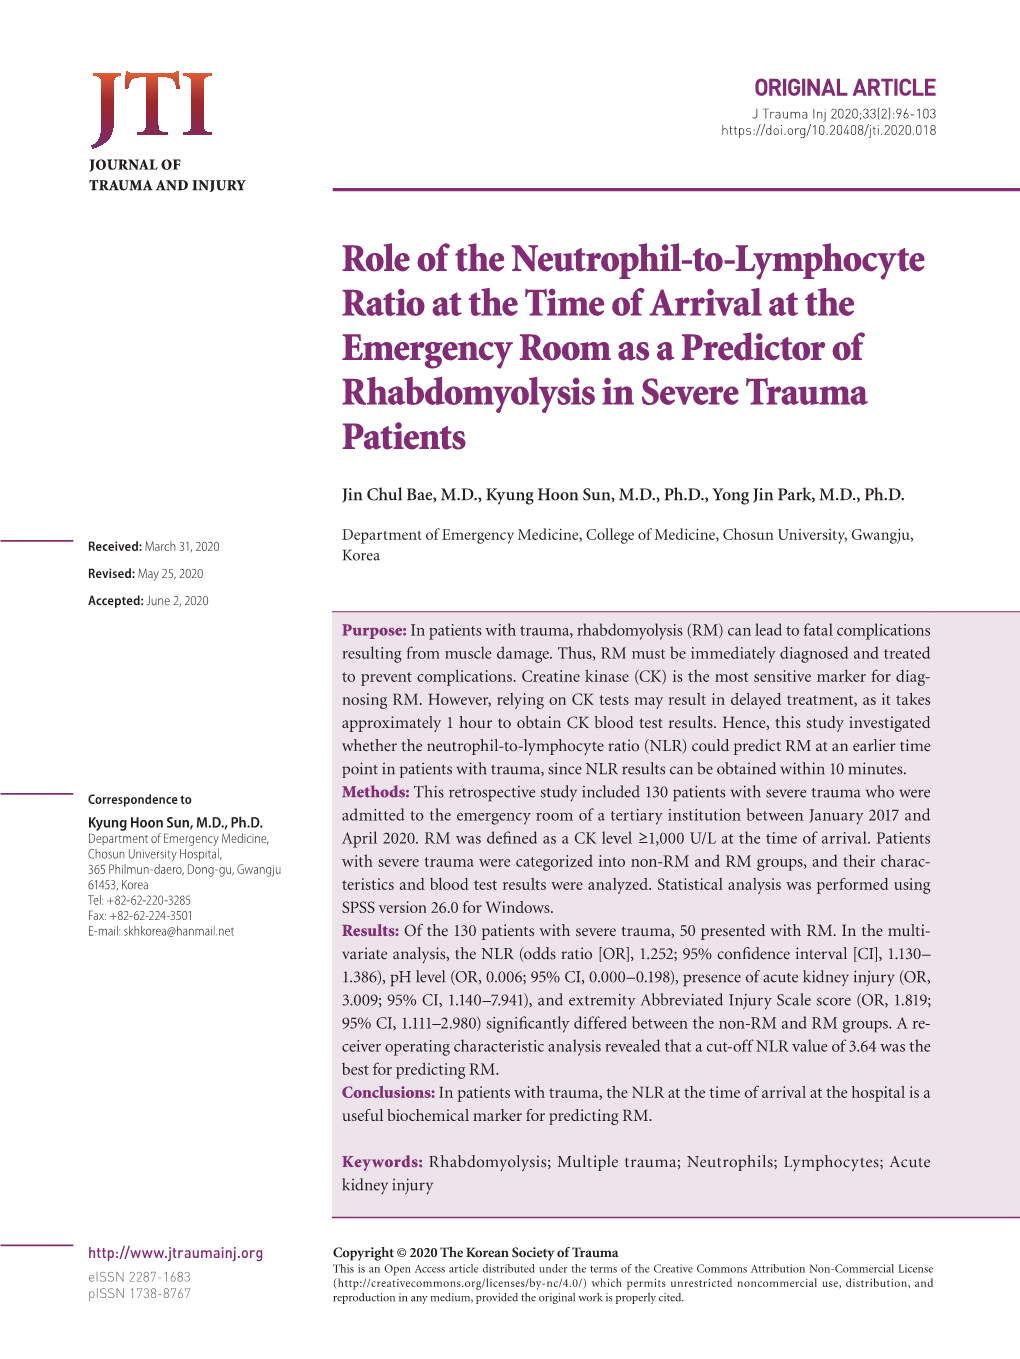 Role of the Neutrophil-To-Lymphocyte Ratio at the Time of Arrival at the Emergency Room As a Predictor of Rhabdomyolysis in Severe Trauma Patients